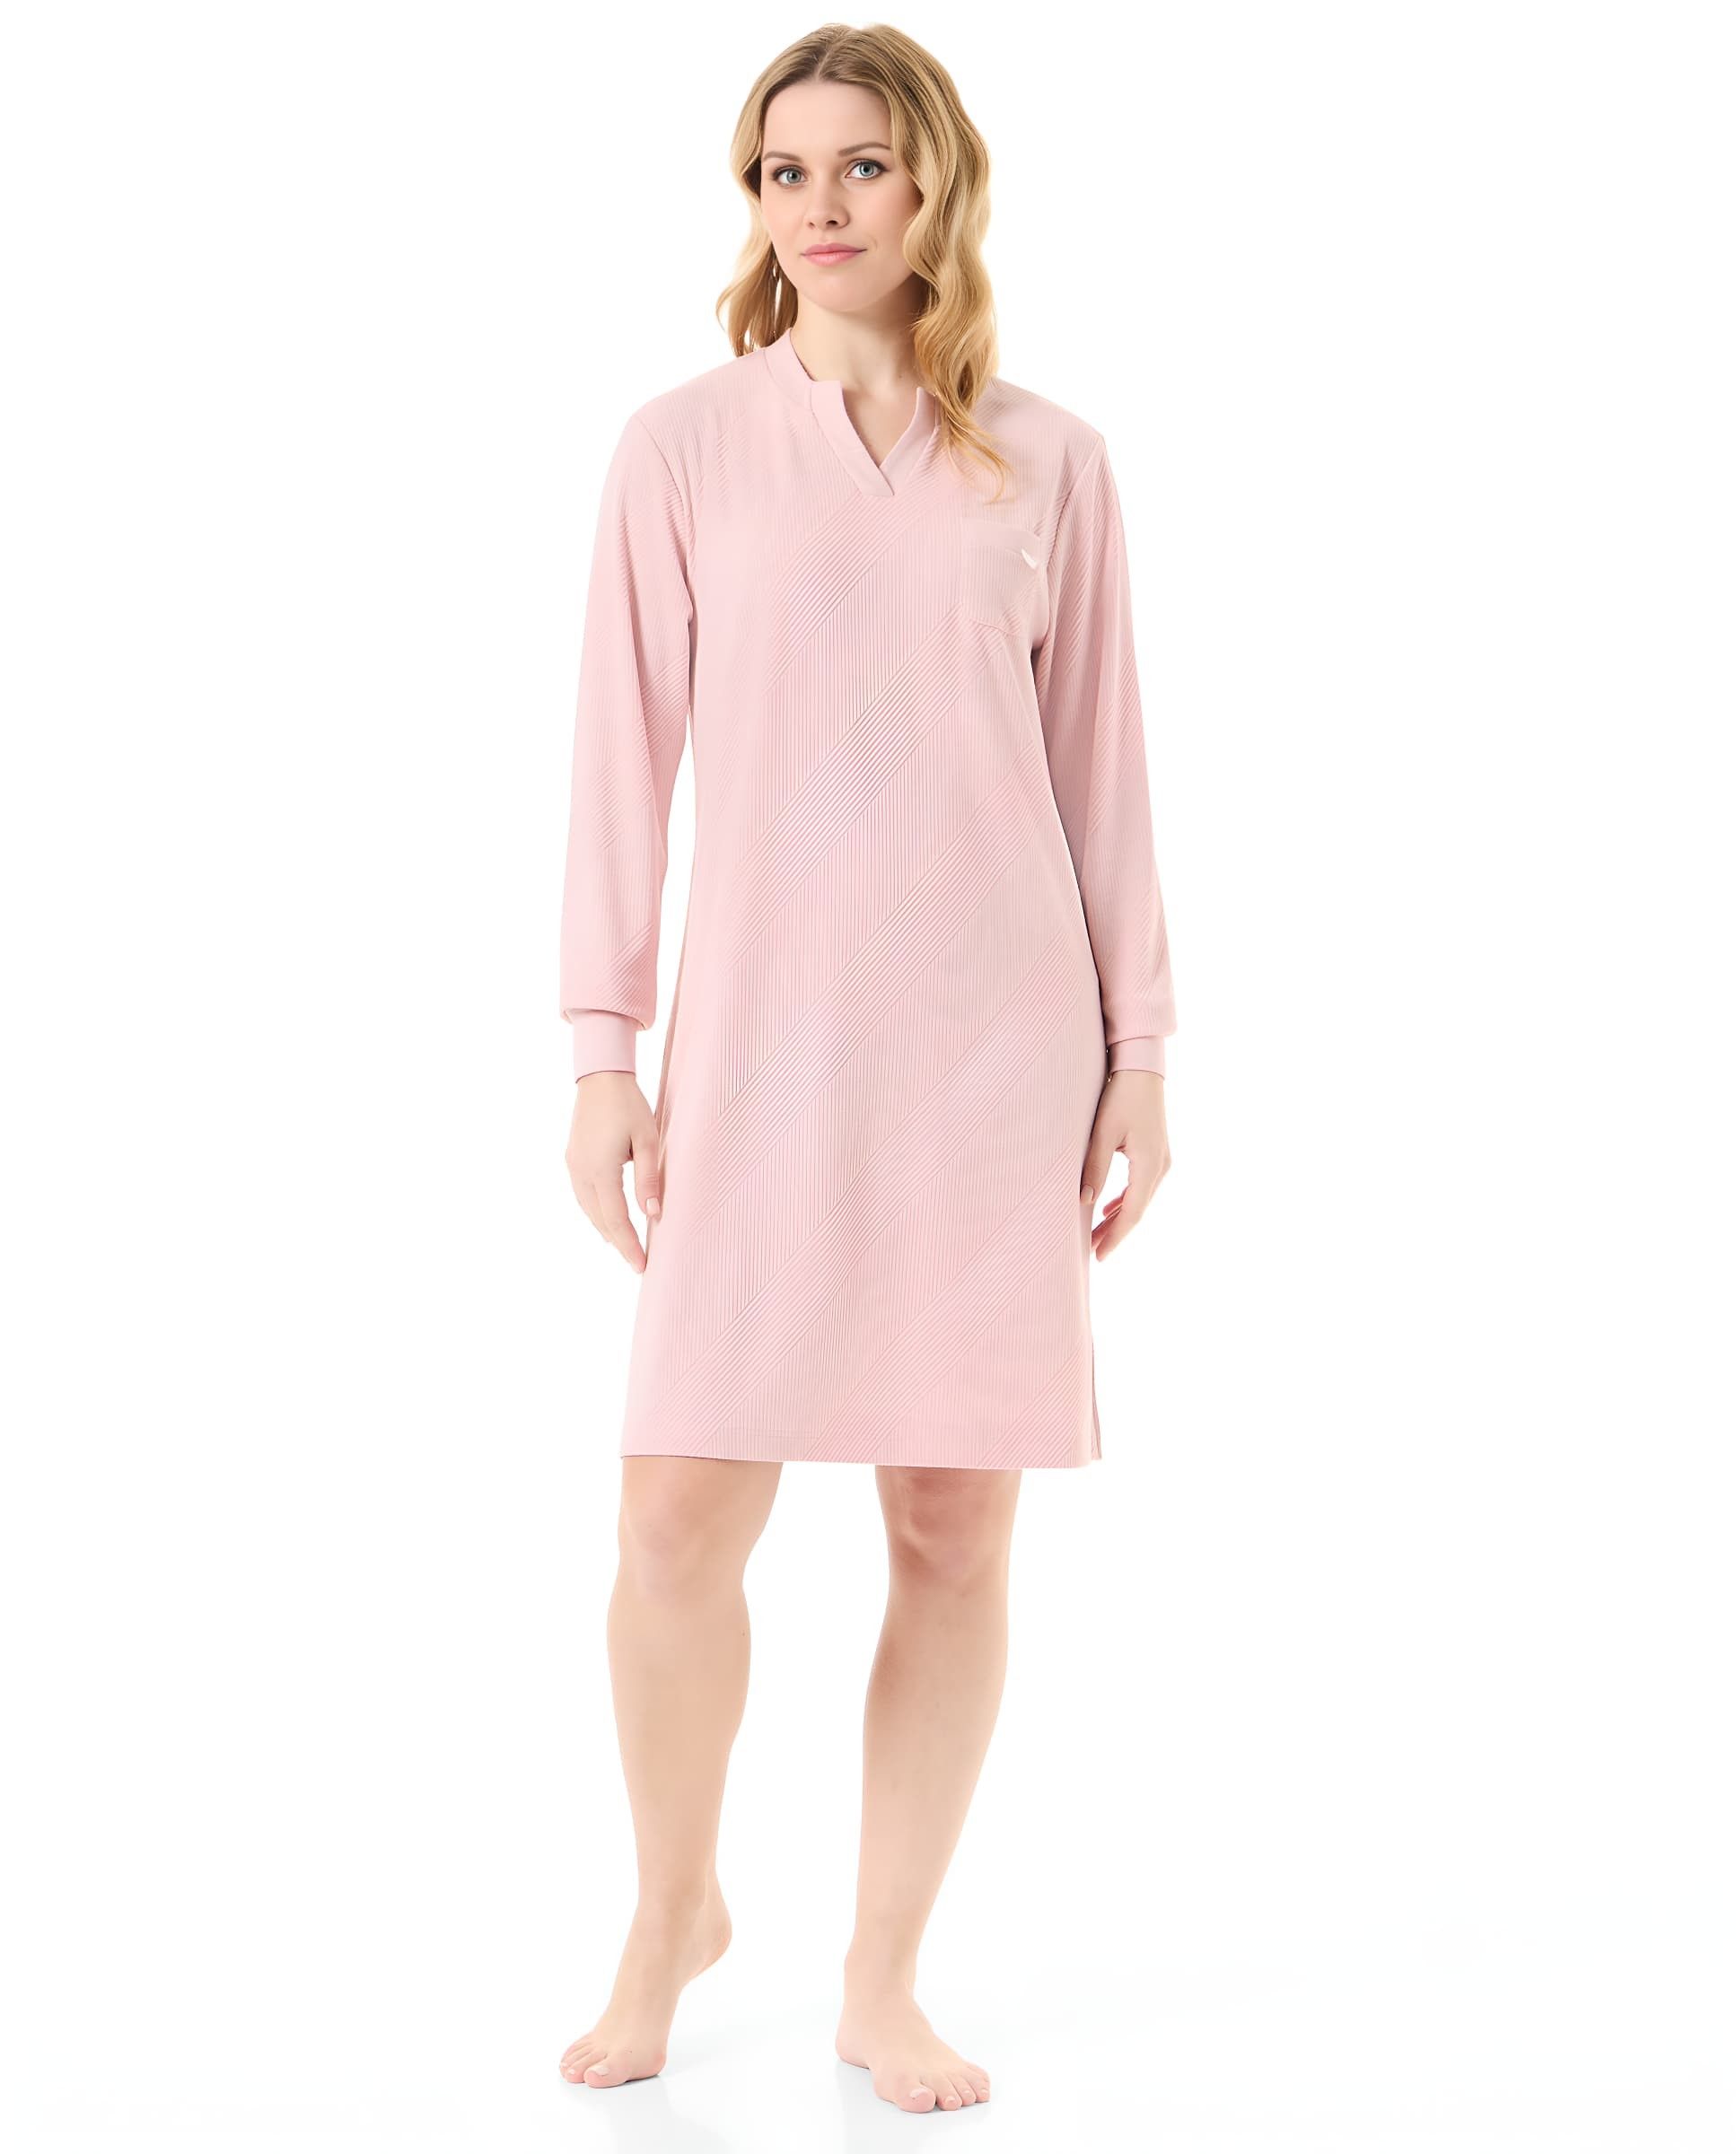 Woman with long ribbed pink nightdress embossed